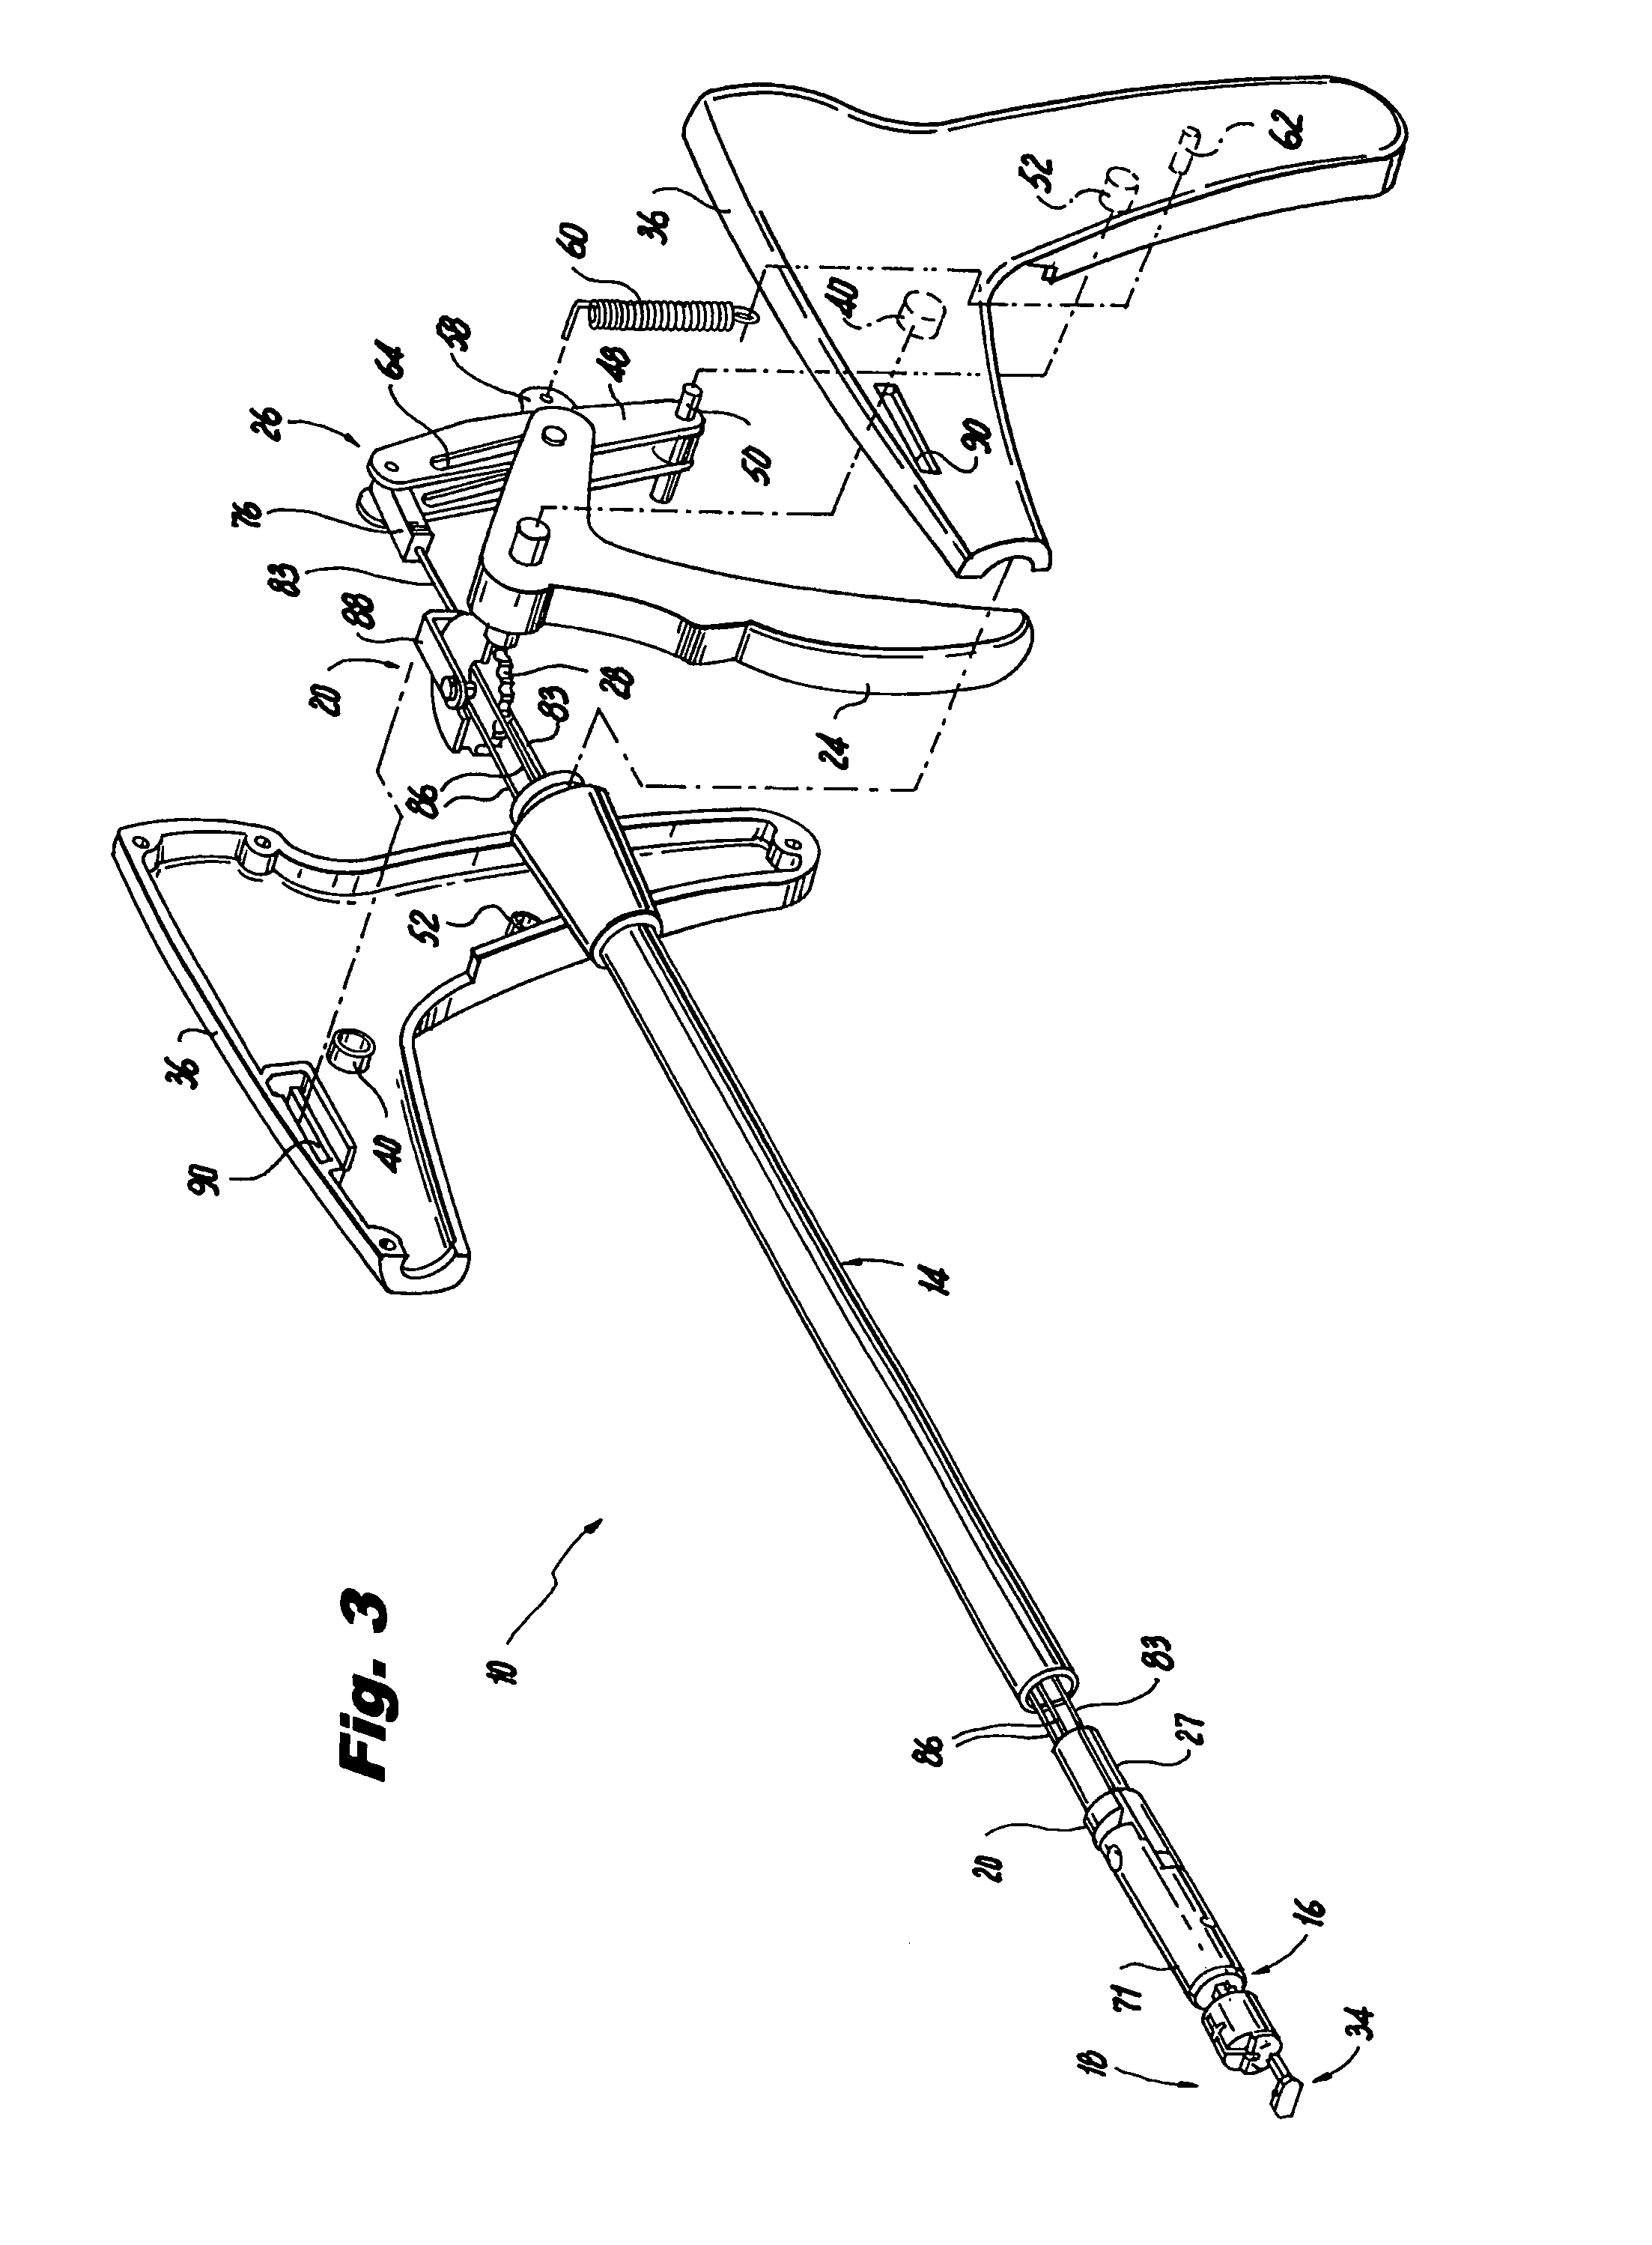 Apparatus for stapling and incising tissue